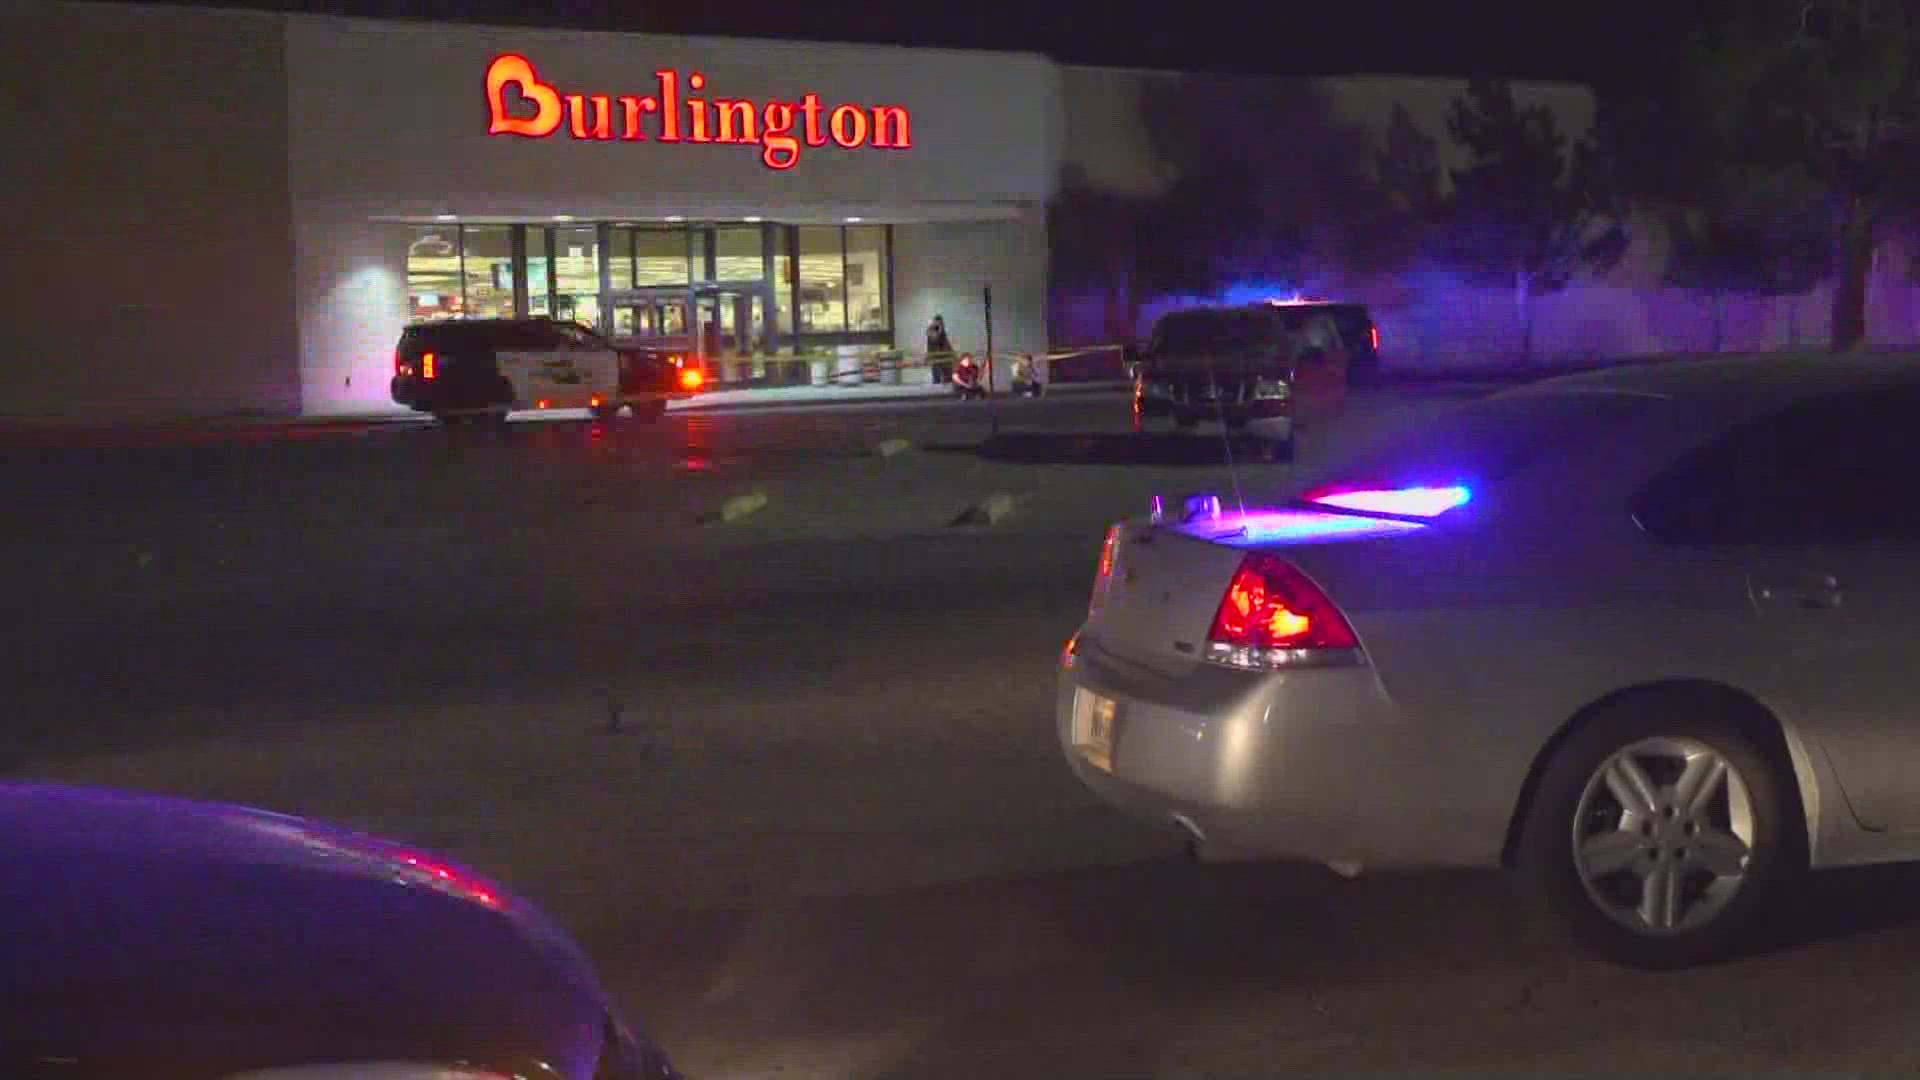 One person shot and sent to hospital after altercation in the parking lot.